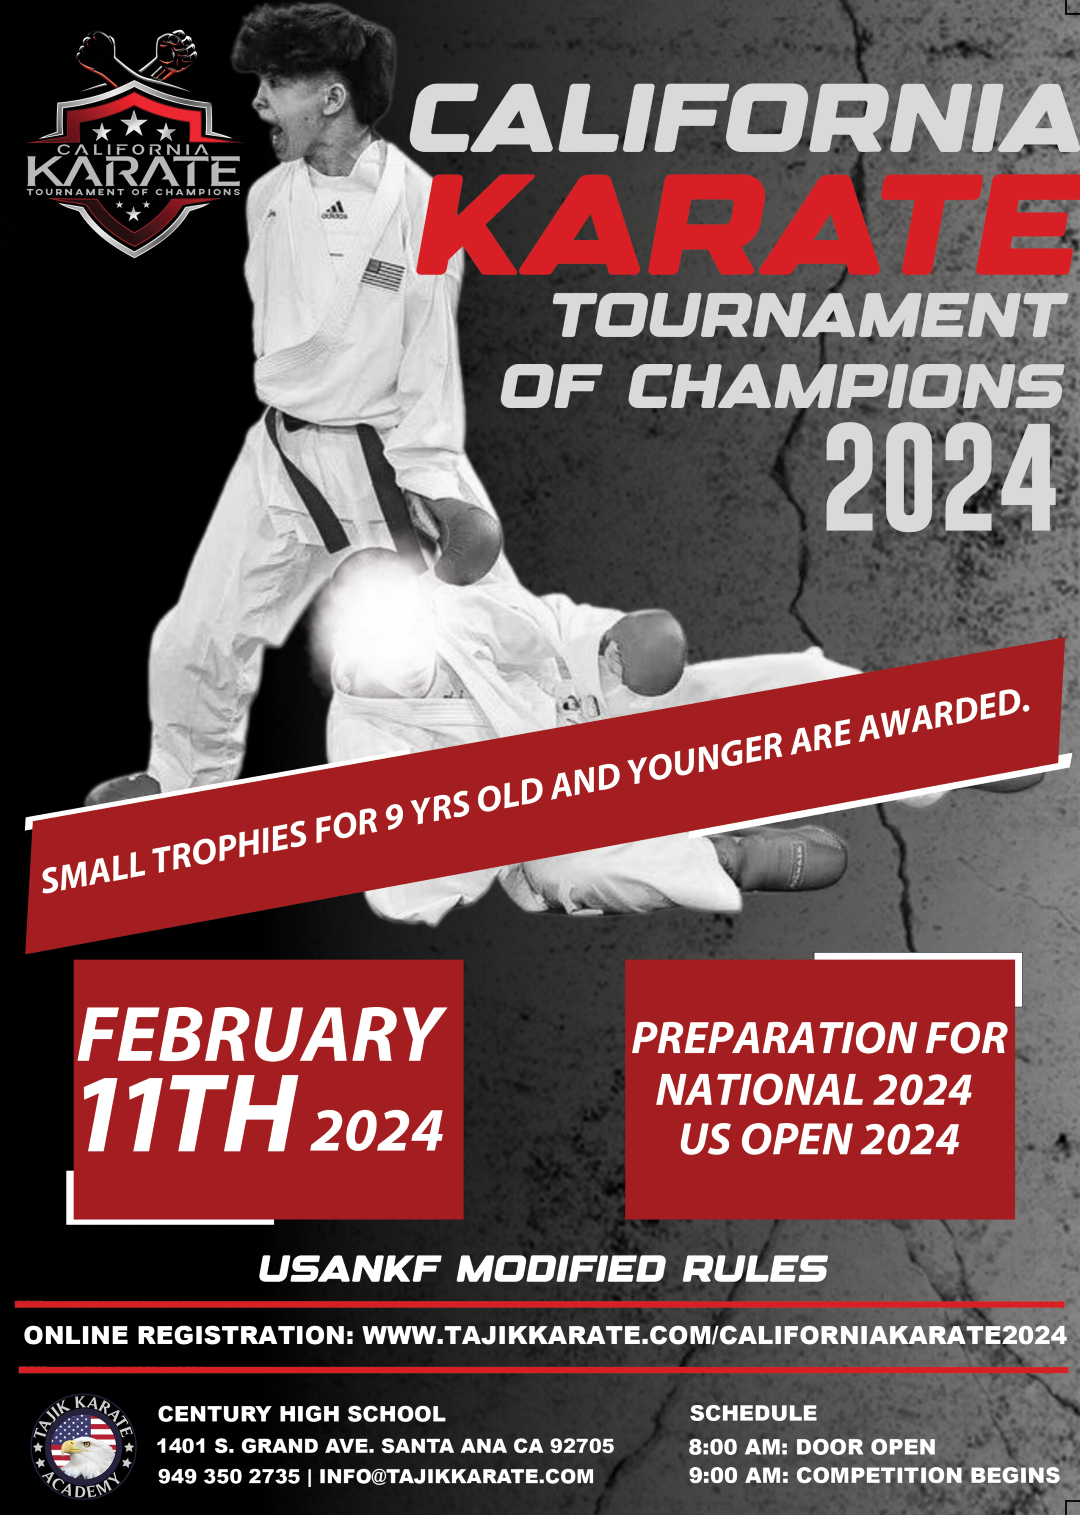 TOURNAMENT OF CHAMPIONS 2024 version 2 Recovered